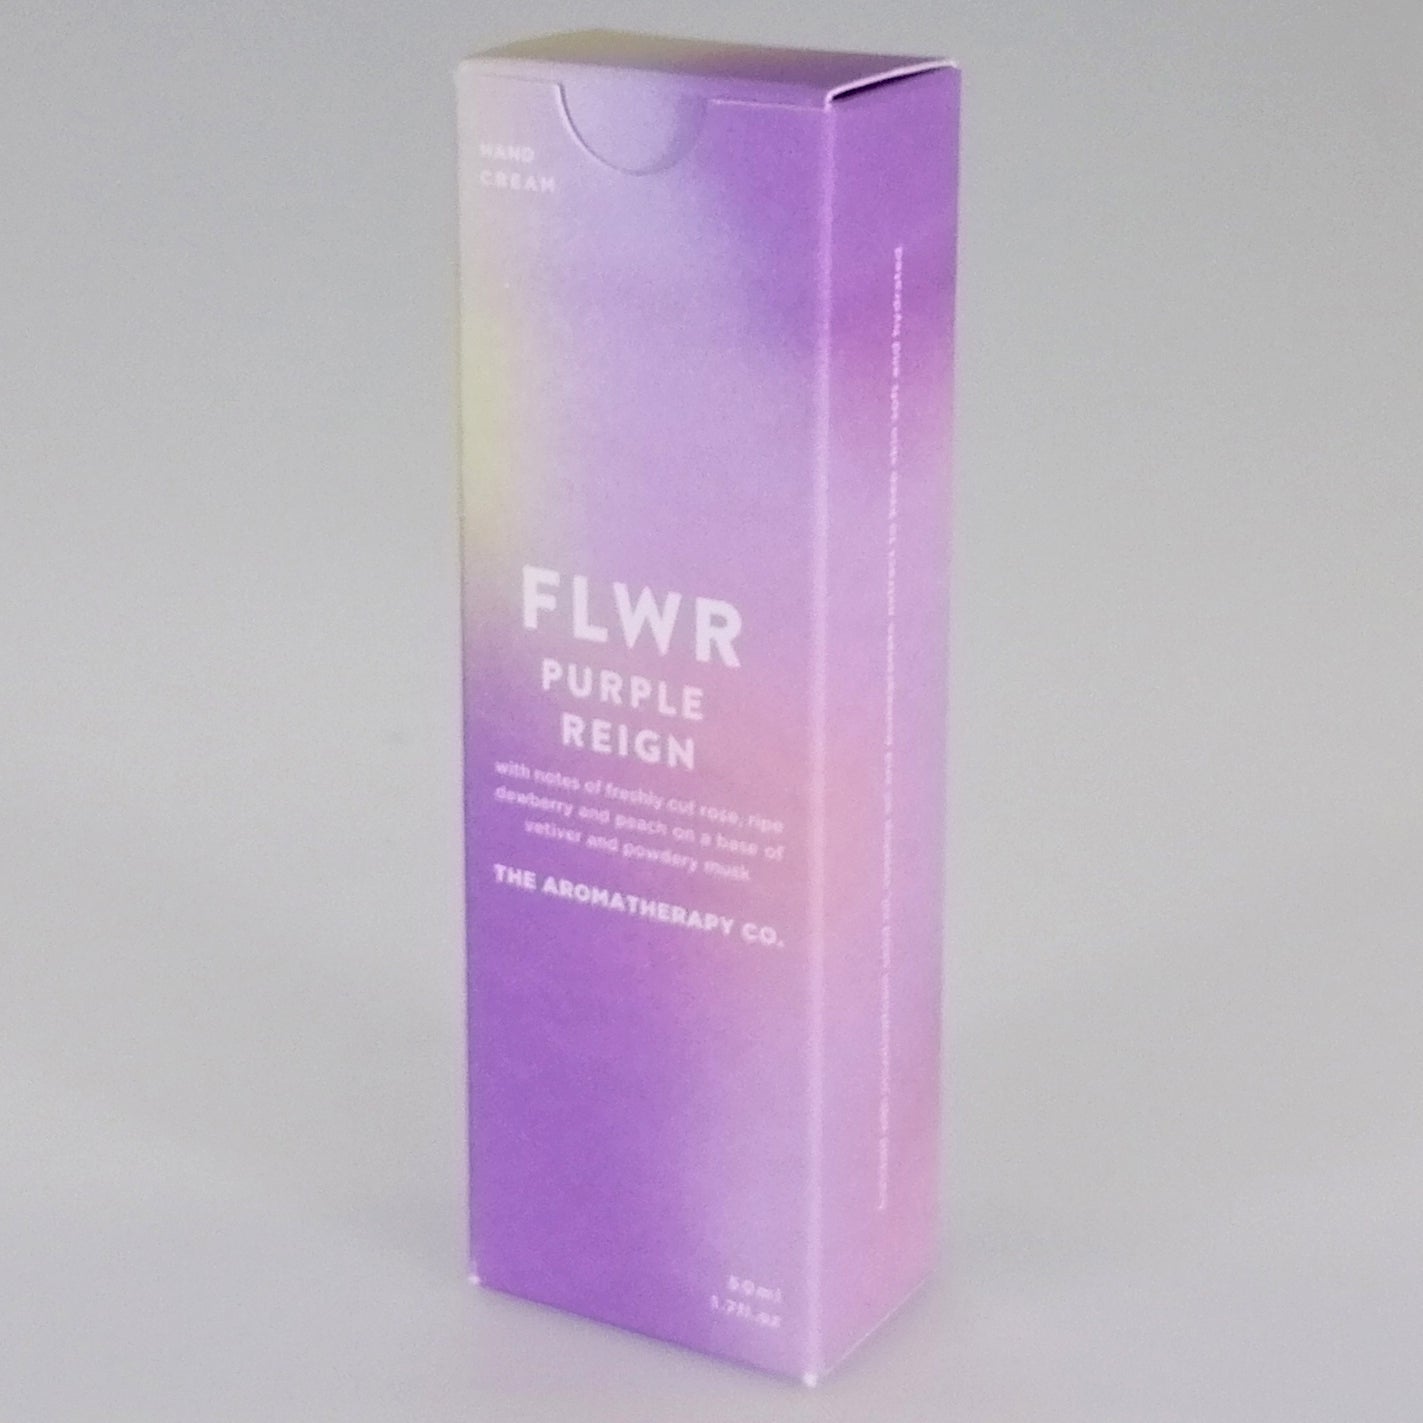 The Aromatherapy Co. FLWR Hand Cream - Purple Reign